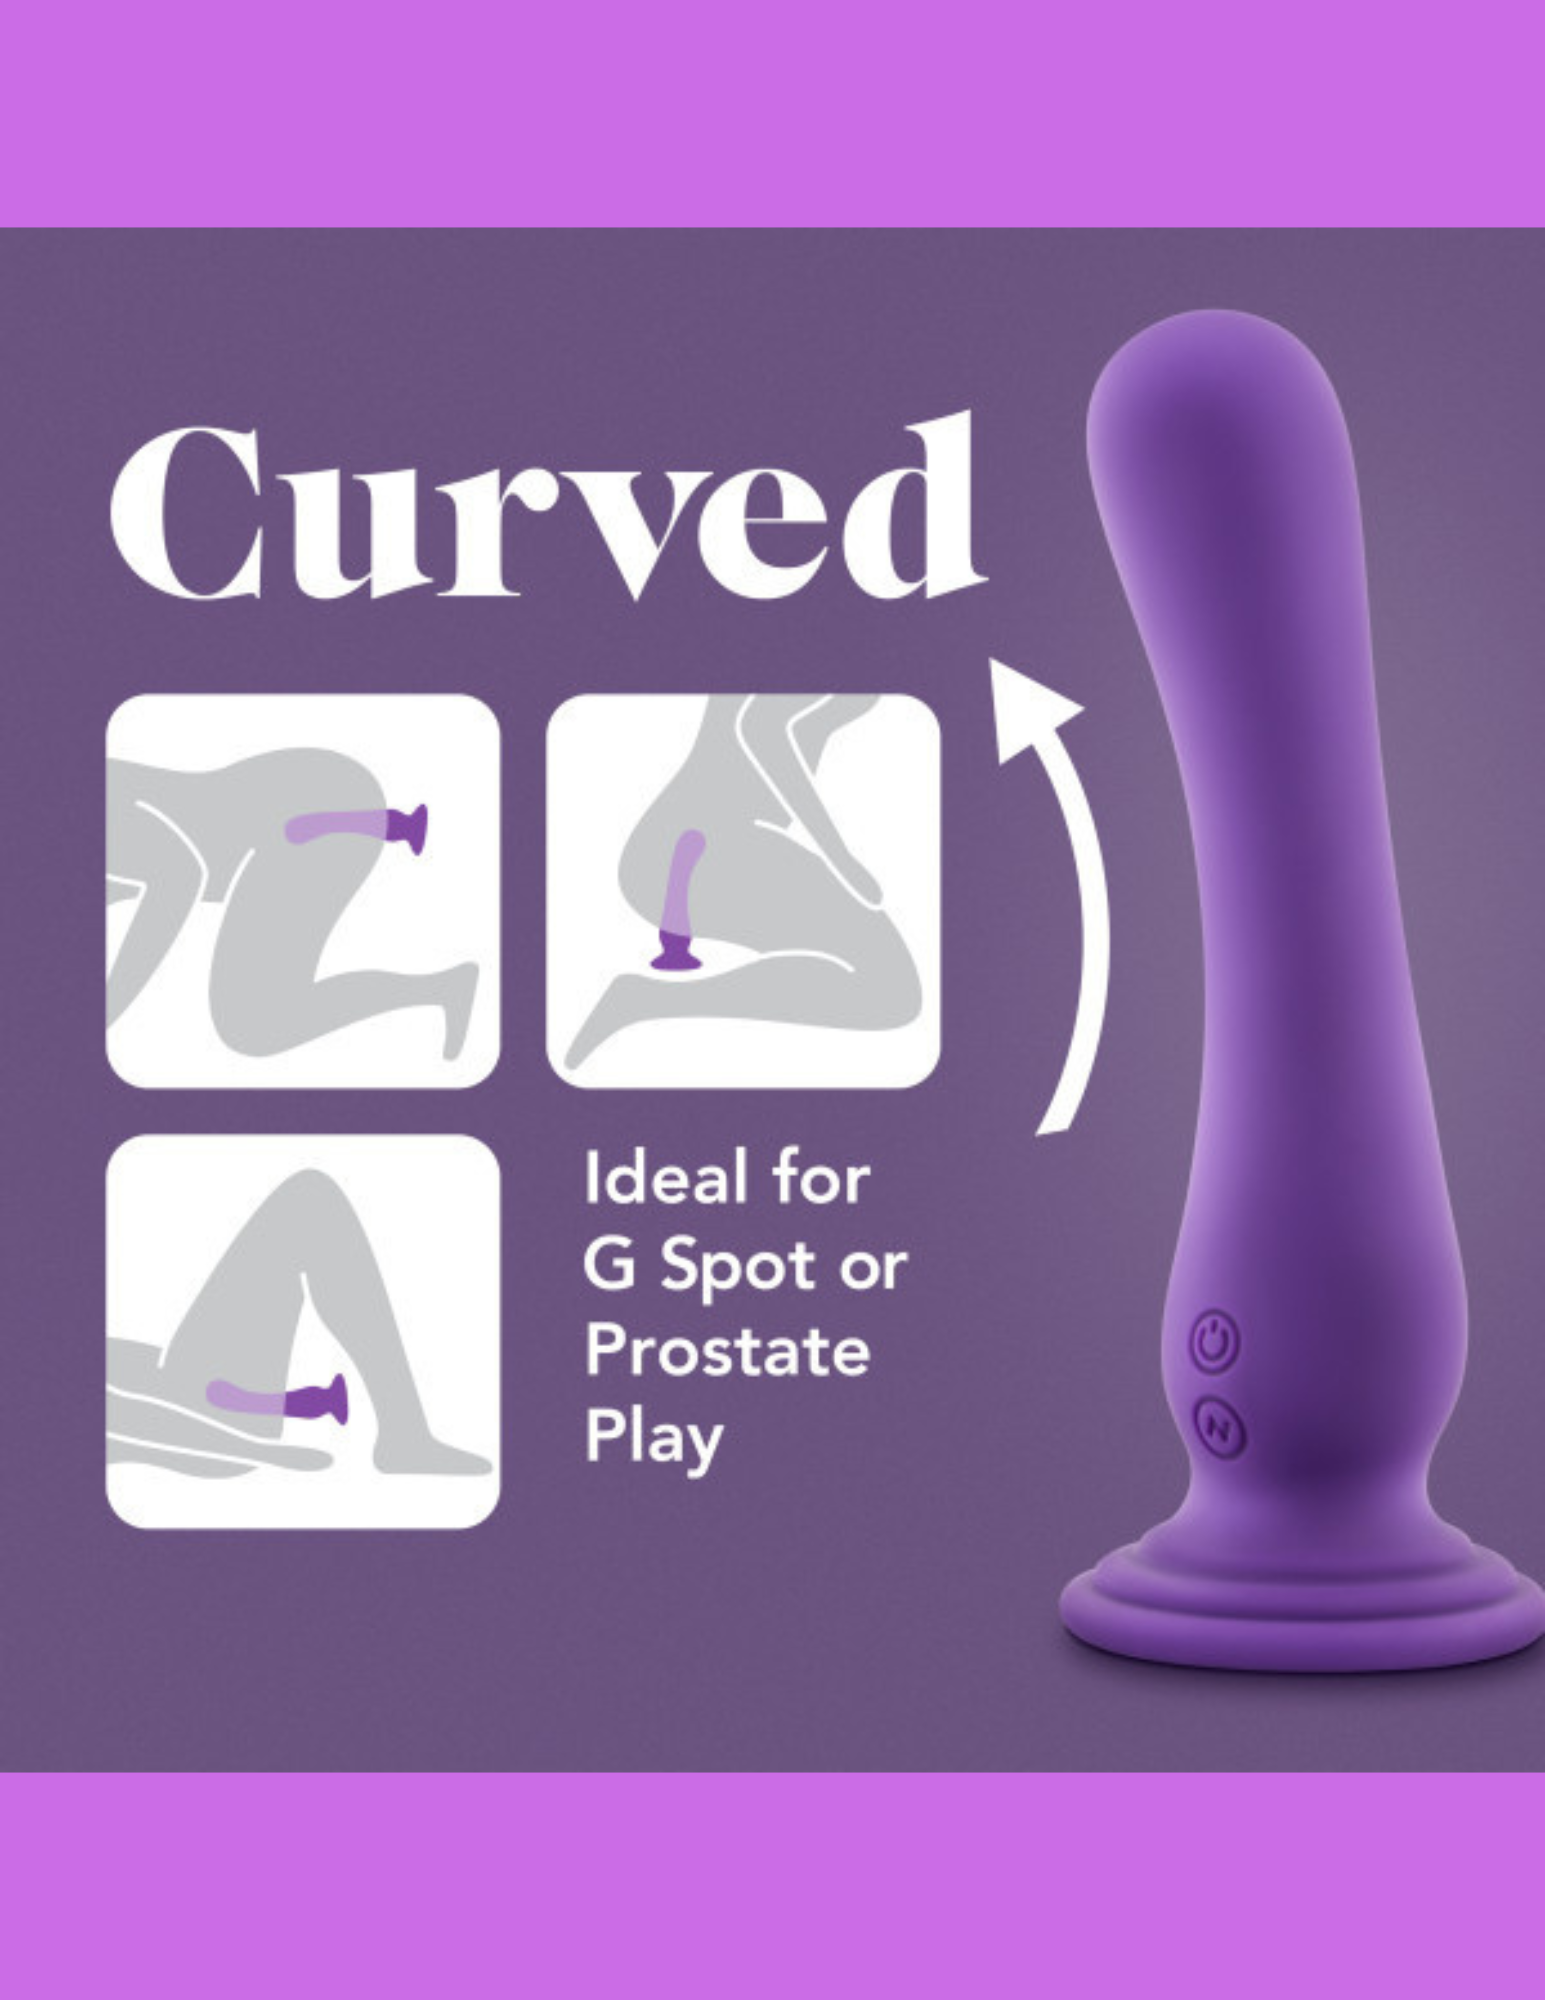 Diagram shows the various ways that the Impressions Ibiza Vibrator from Blush (purple) can be used due to its strong suction base.